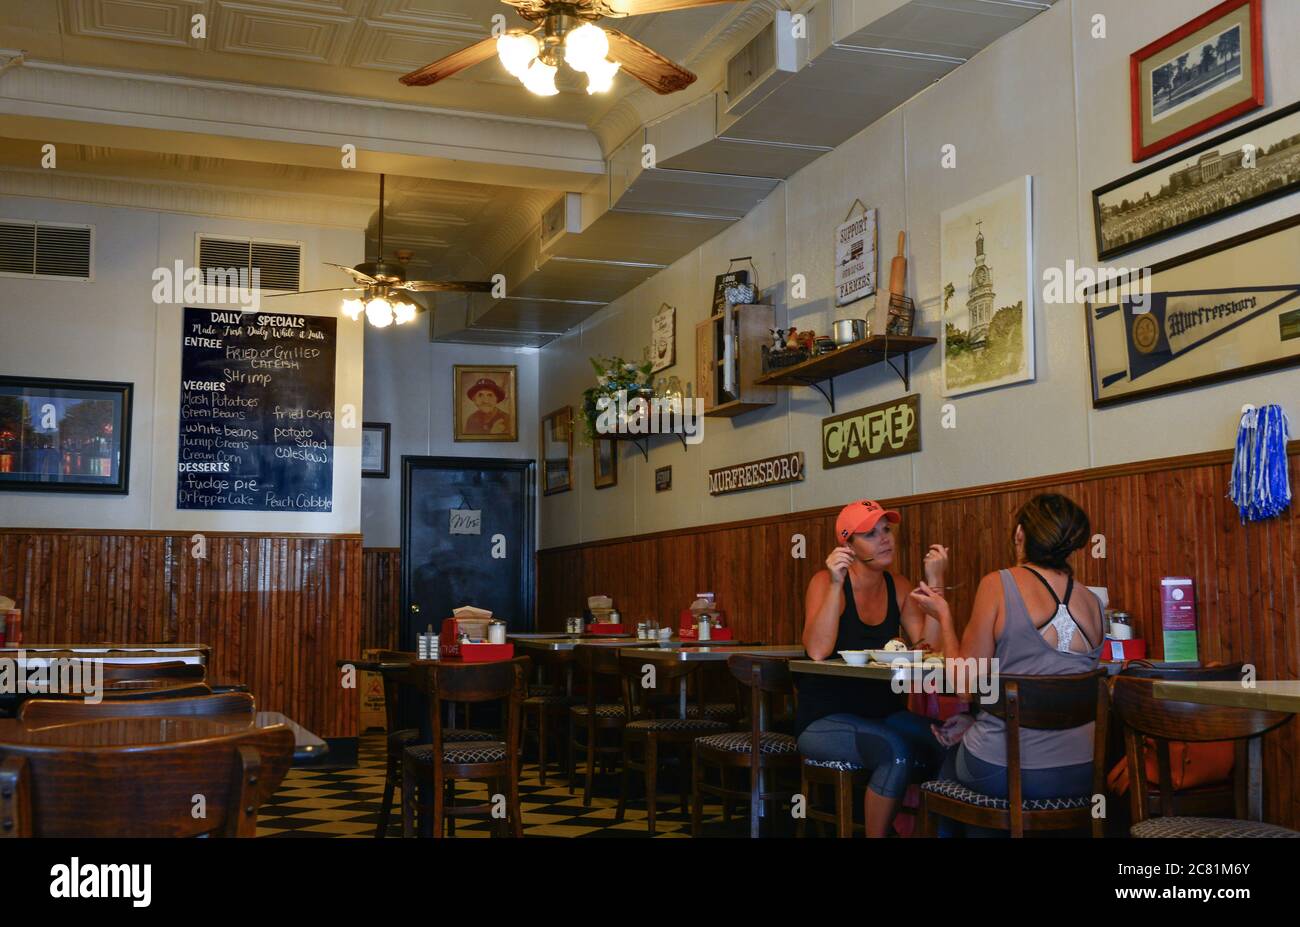 Interior of the City Cafe with people having lunch, a mainstay known as the oldest restaurant in TN, on the square in Murfreesboro, TN Stock Photo